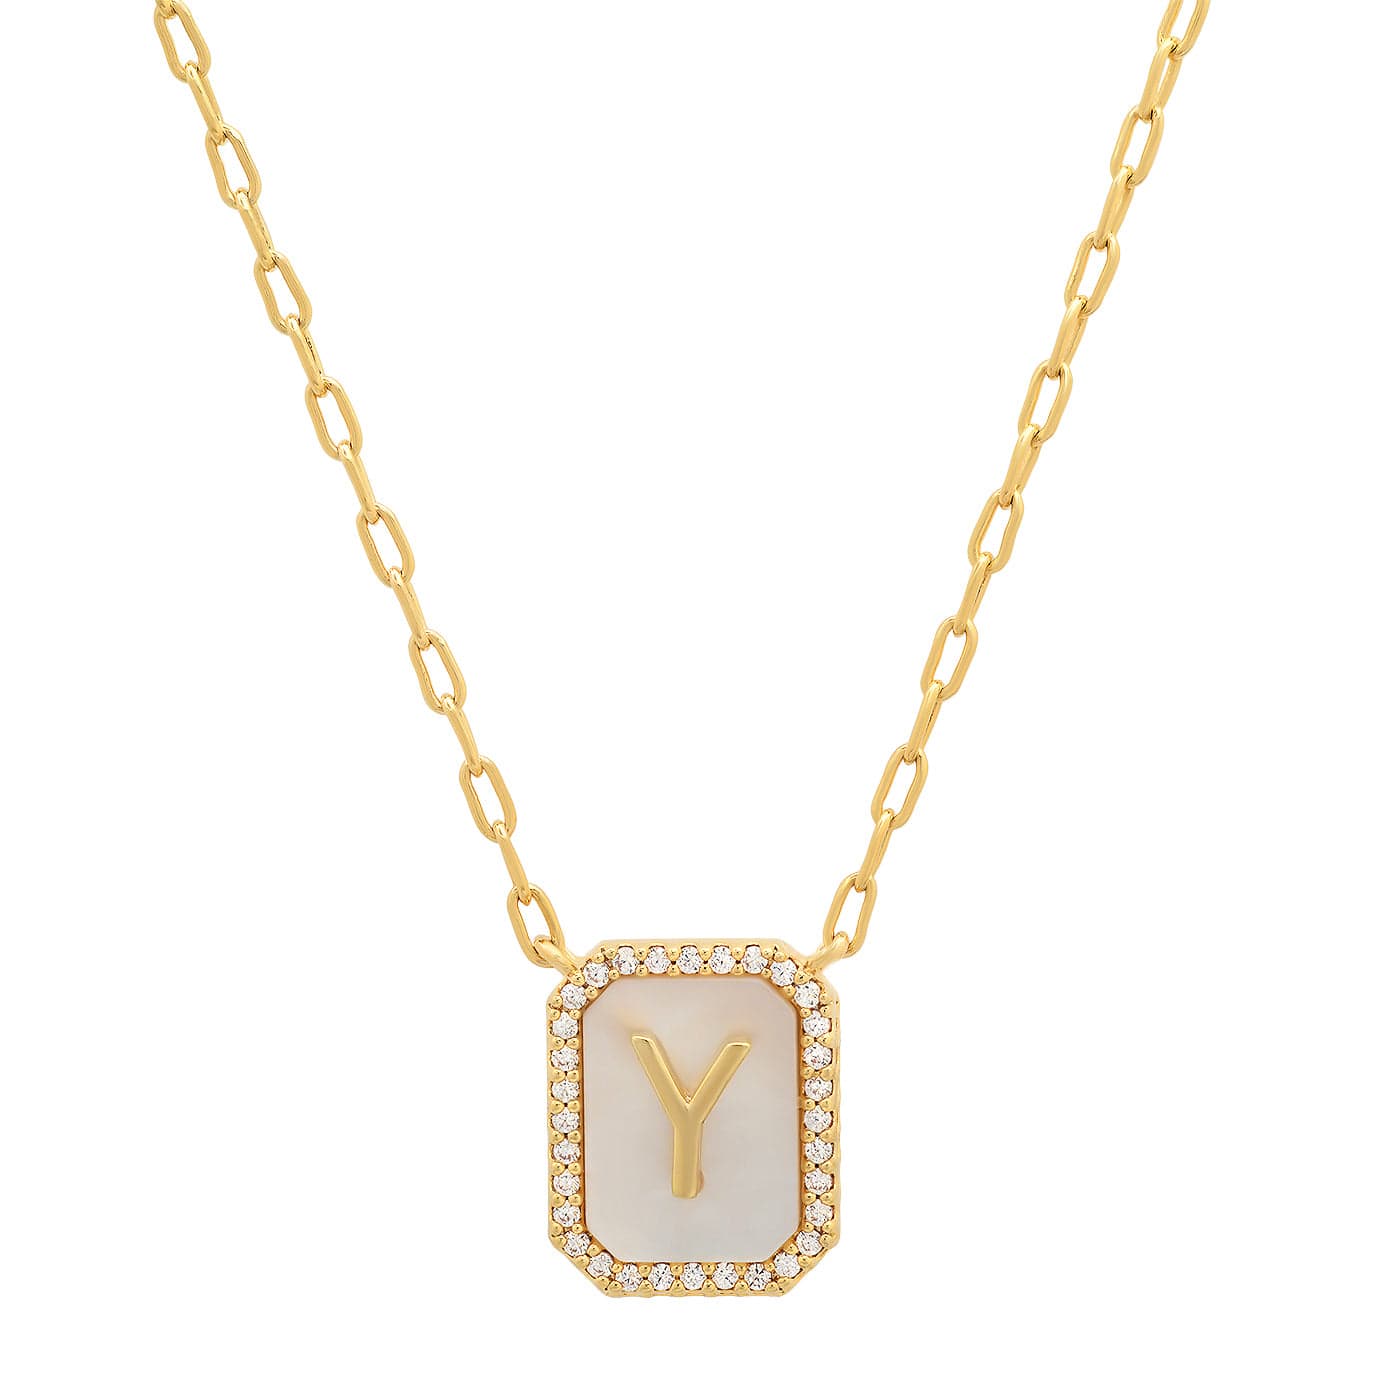 TAI JEWELRY Necklace Y Mother Of Pearl Monogram Necklace